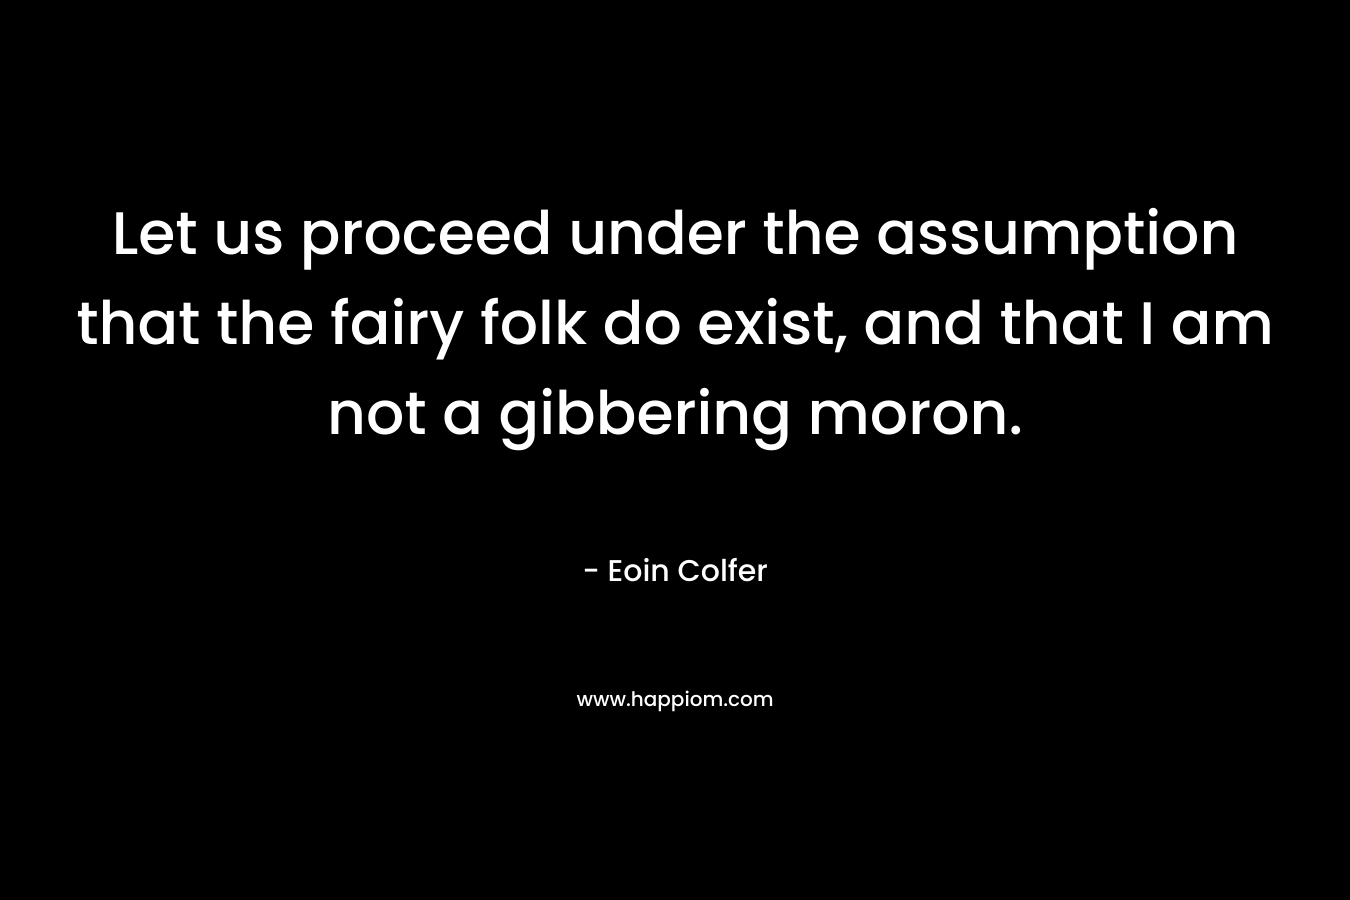 Let us proceed under the assumption that the fairy folk do exist, and that I am not a gibbering moron. – Eoin Colfer